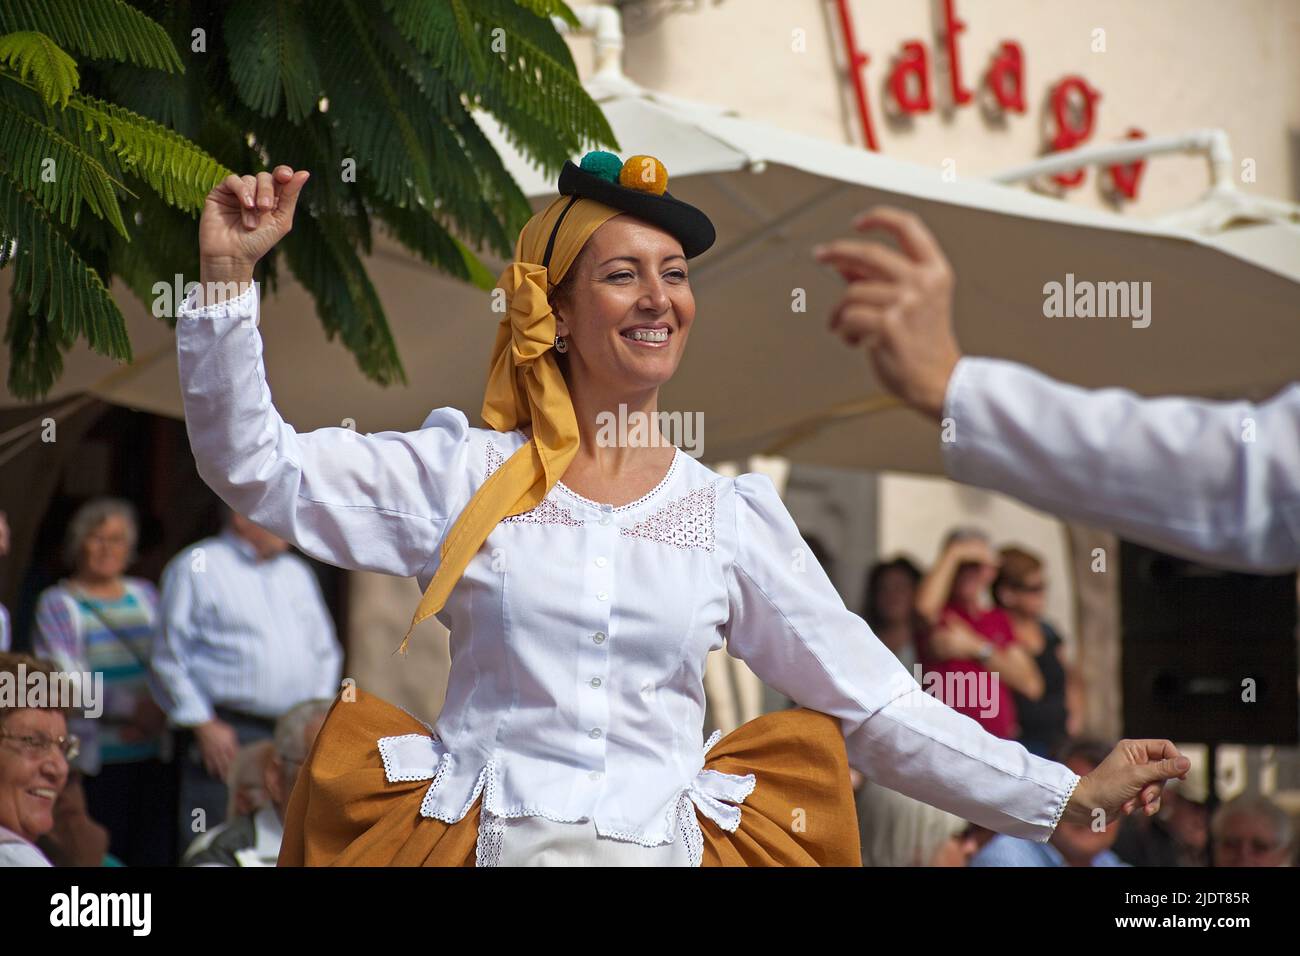 Folklore show at Pueblo Canario, woman dancing with traditional costume at Parque Doramas, Las Palmas, Grand Canary, Canary islands, Spain, Europe Stock Photo